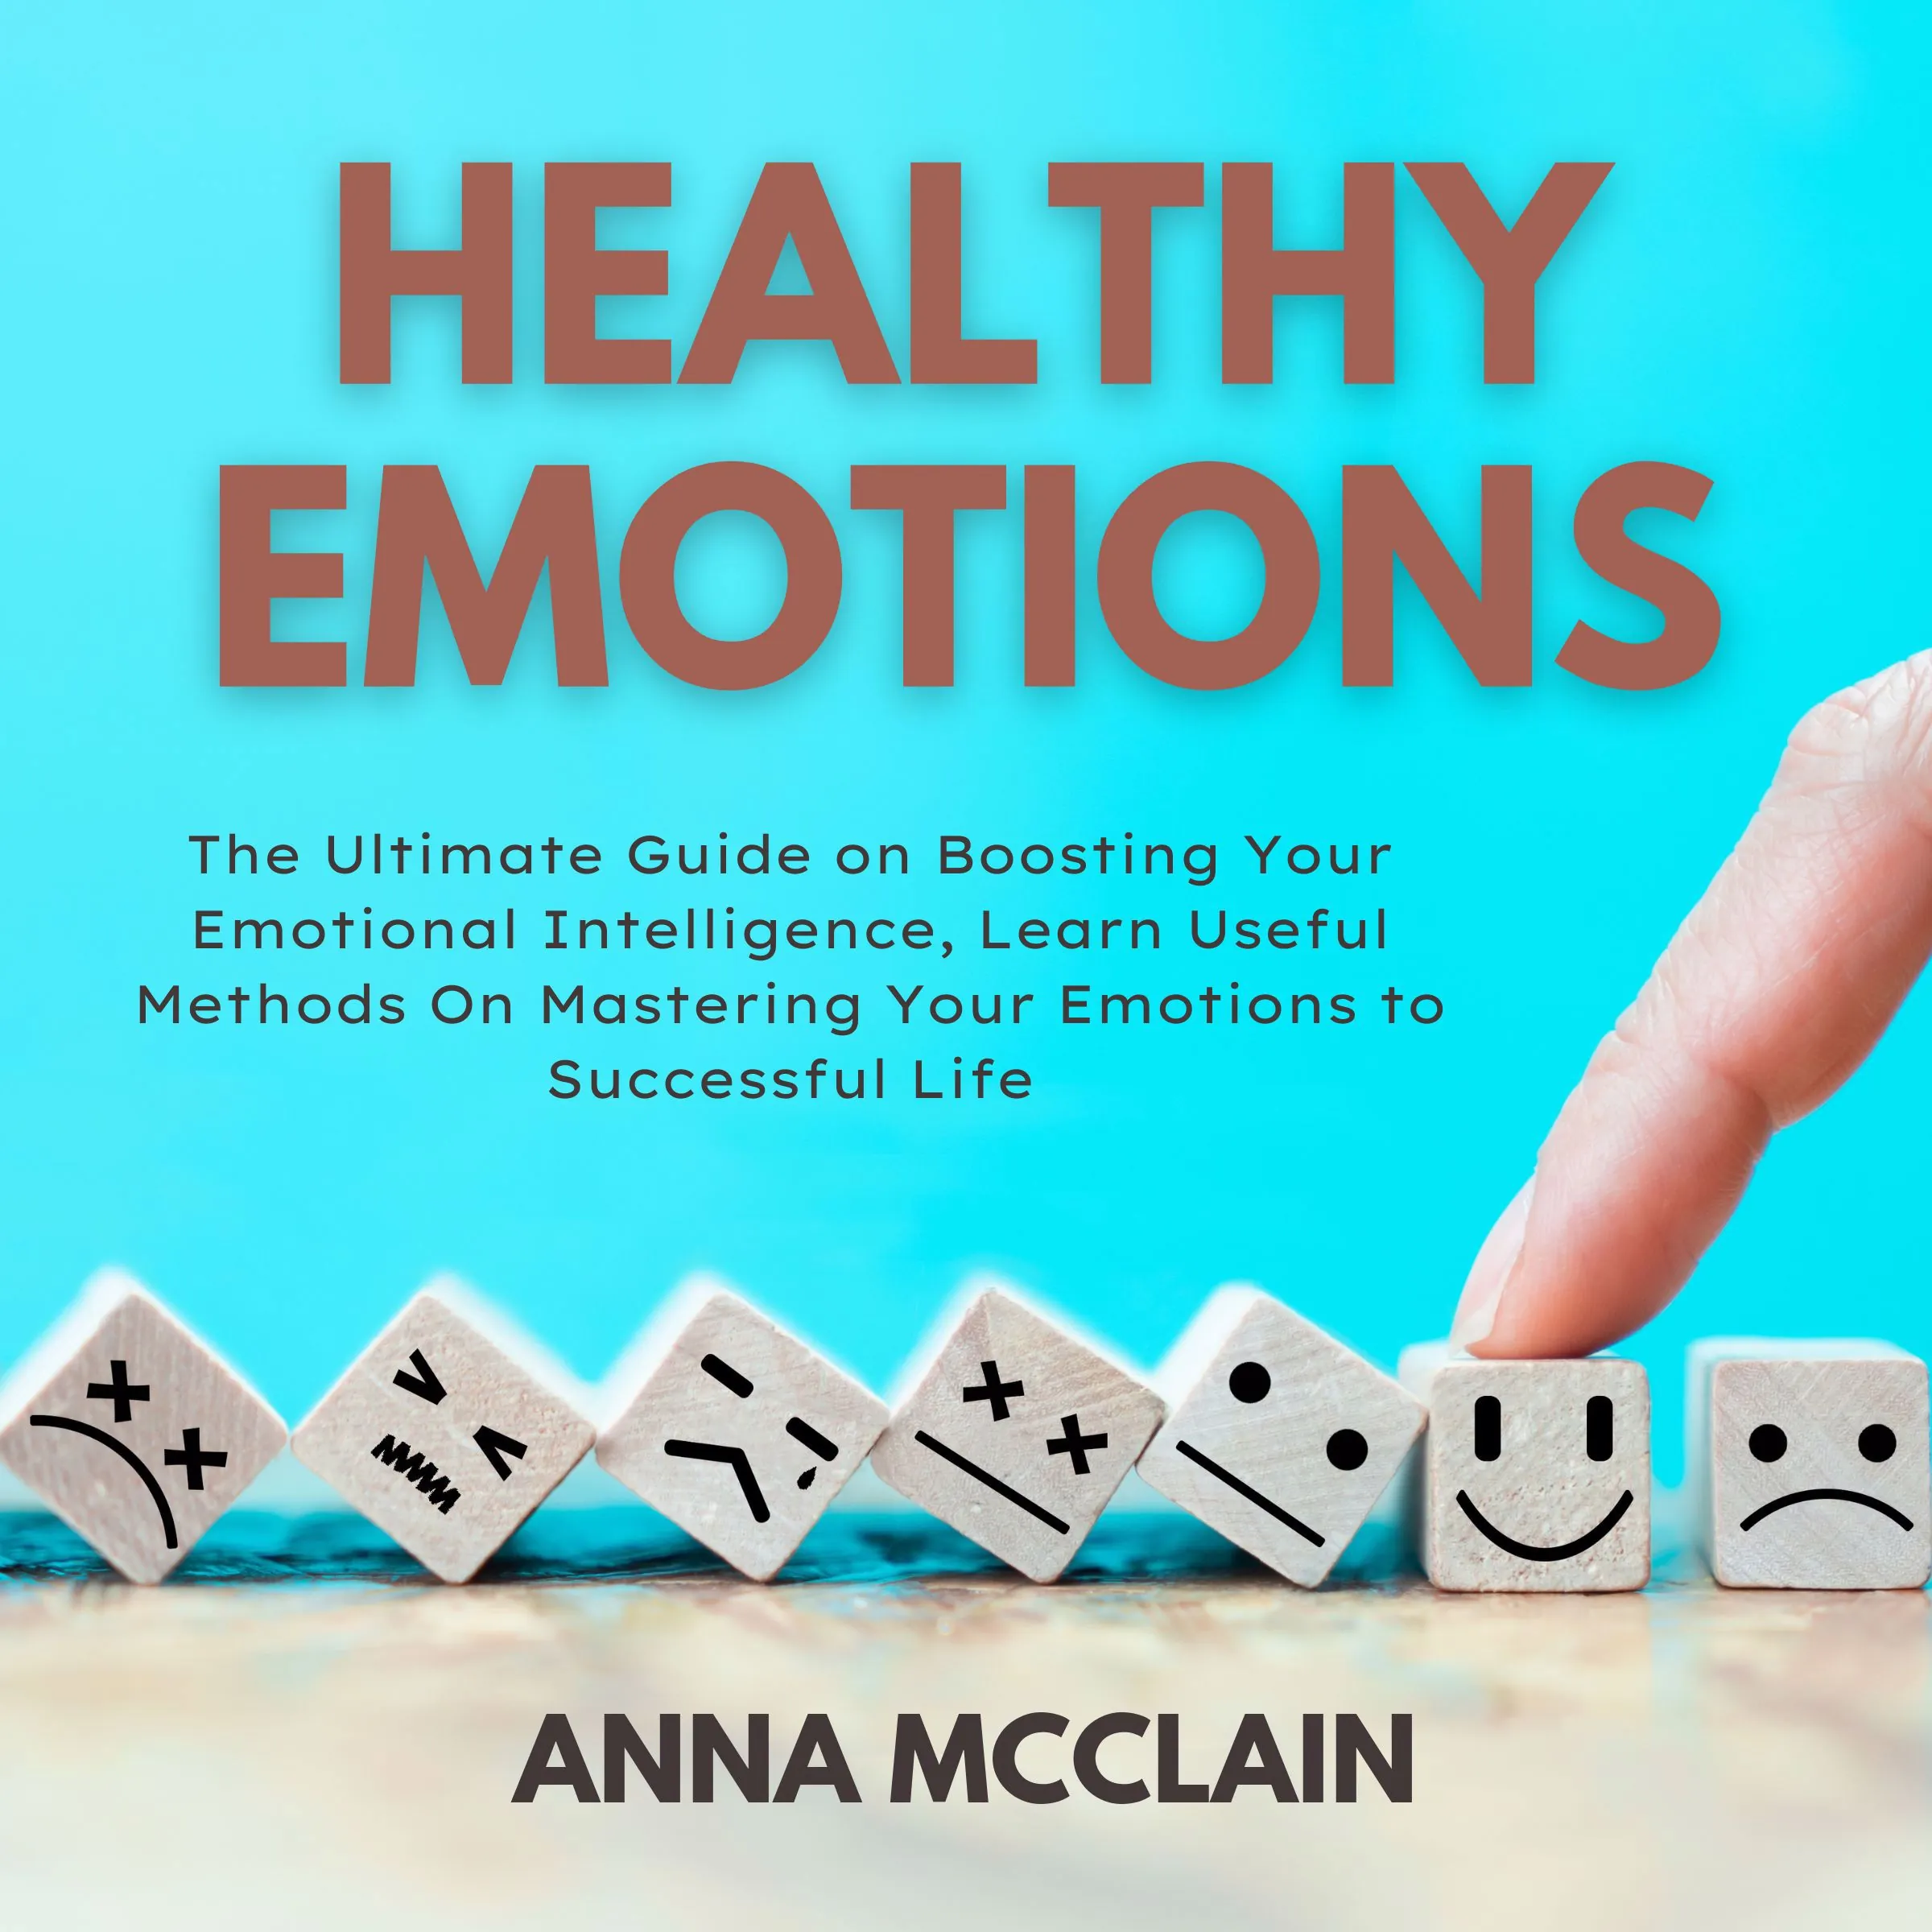 Healthy Emotions by Anna Mcclain Audiobook